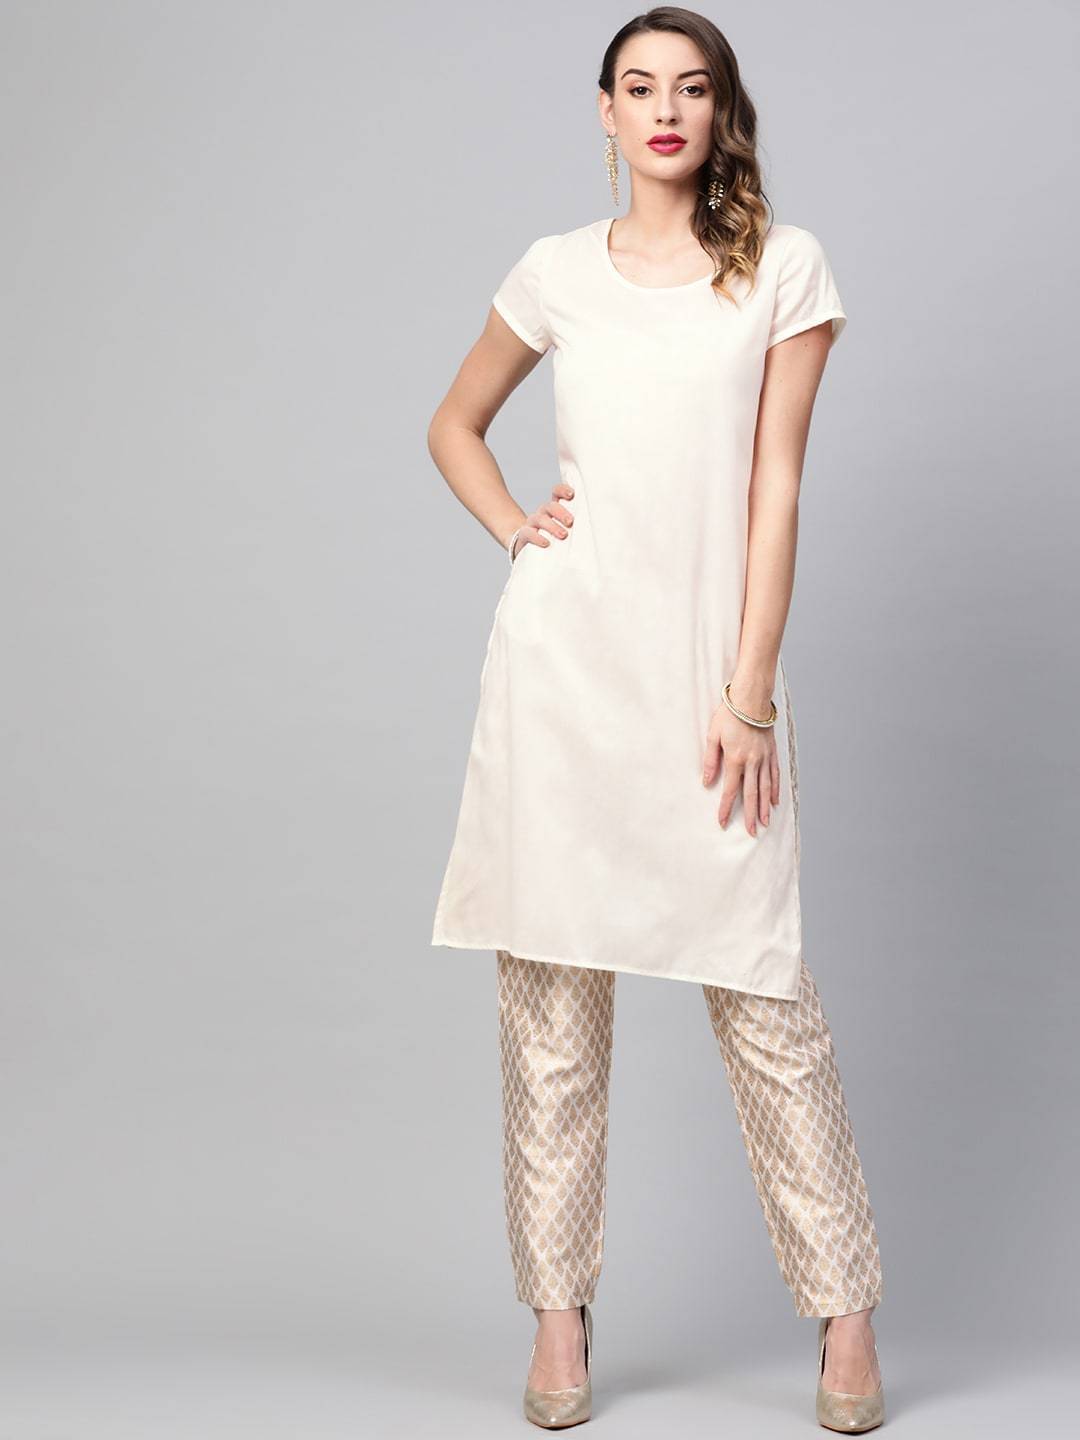 Women's  Off-White & Peach-Coloured Solid Straight Kurta with Ethnic Jacket - AKS